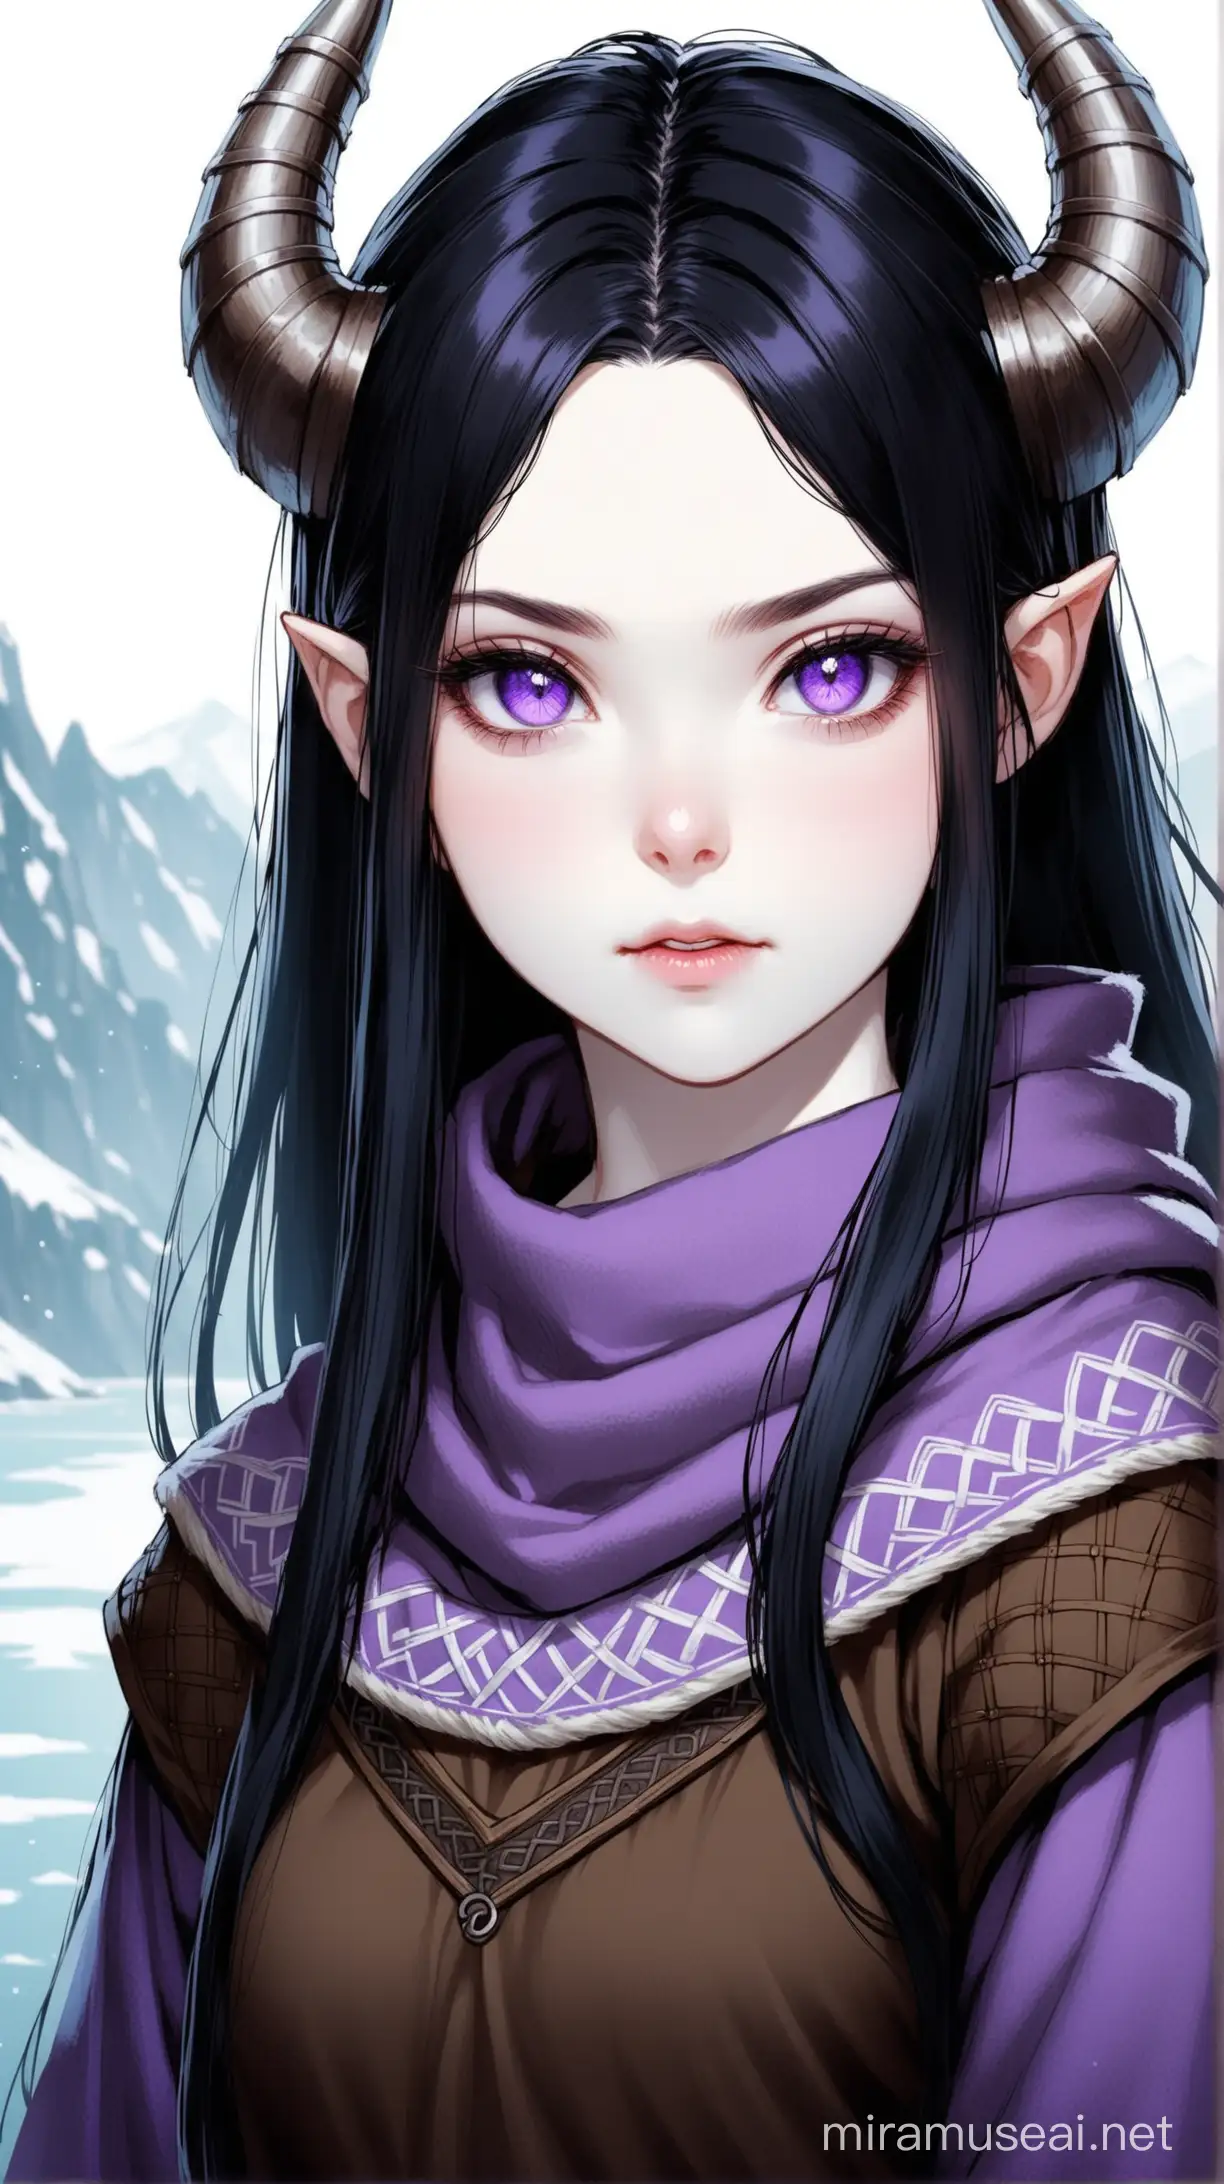 A young viking girl with black hair, pale skin  and violet eyes.